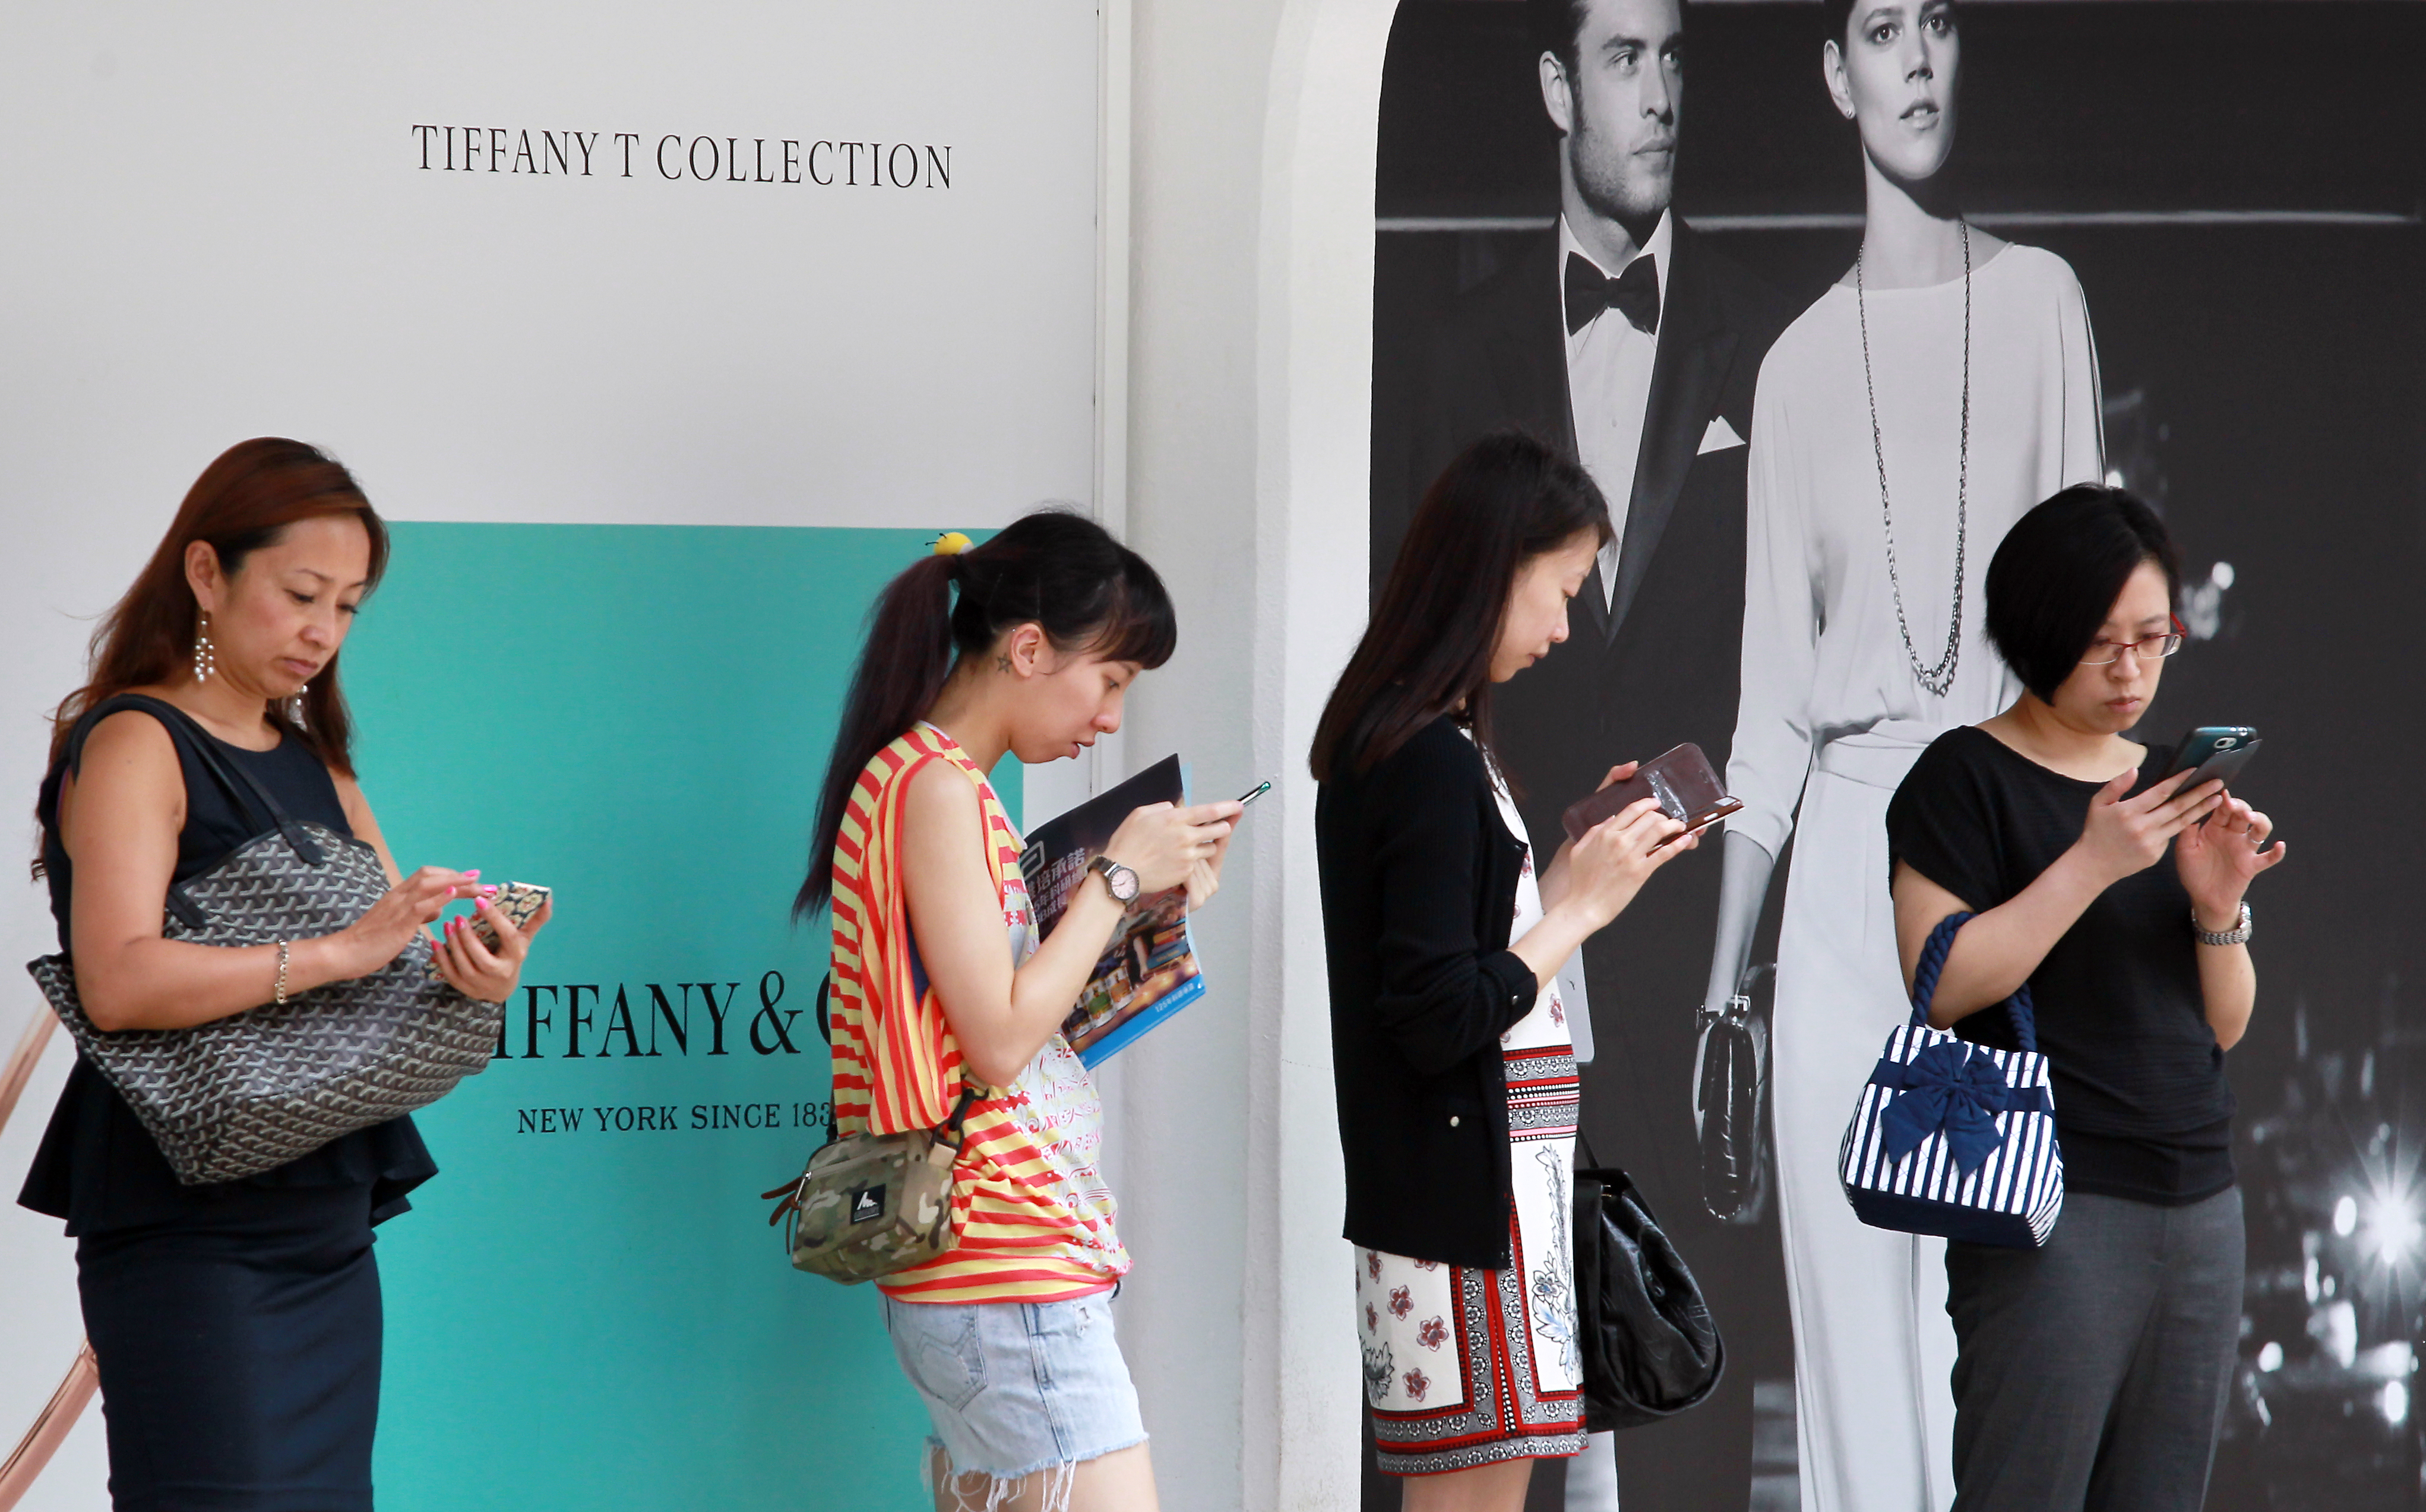 As far as hardware is concerned, Hong Kong is the “mobile phone capital of the world”, with phone companies regularly launching their latest models here. Photo: May Tse